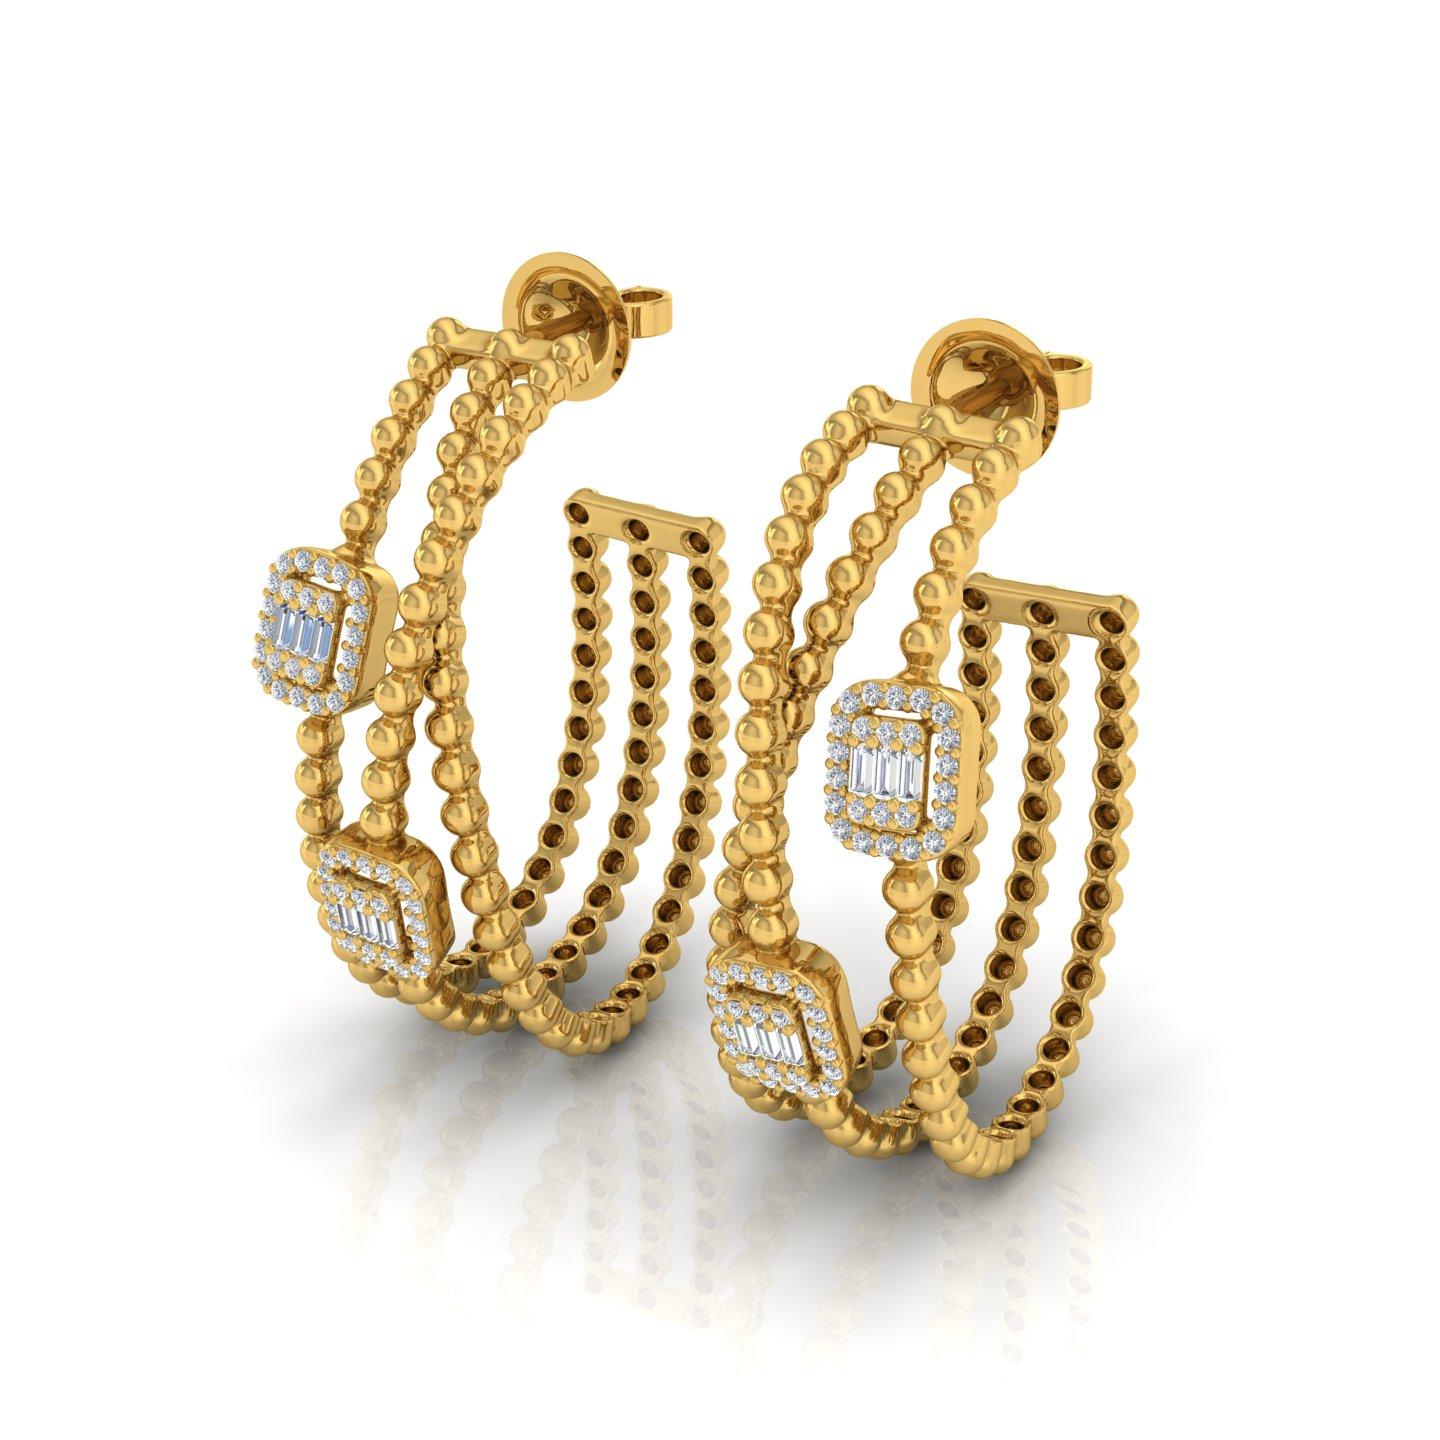 Item Code :- CN-26151
Gross Weight :- 15.07 gm
18k Yellow Gold Weight :- 14.93 gm
Diamond Weight :- 0.70 Carat  ( AVERAGE DIAMOND CLARITY SI1-SI2 & COLOR H-I )
Earrings Size :- 37 mm approx.

✦ Sizing
.....................
We can adjust most items